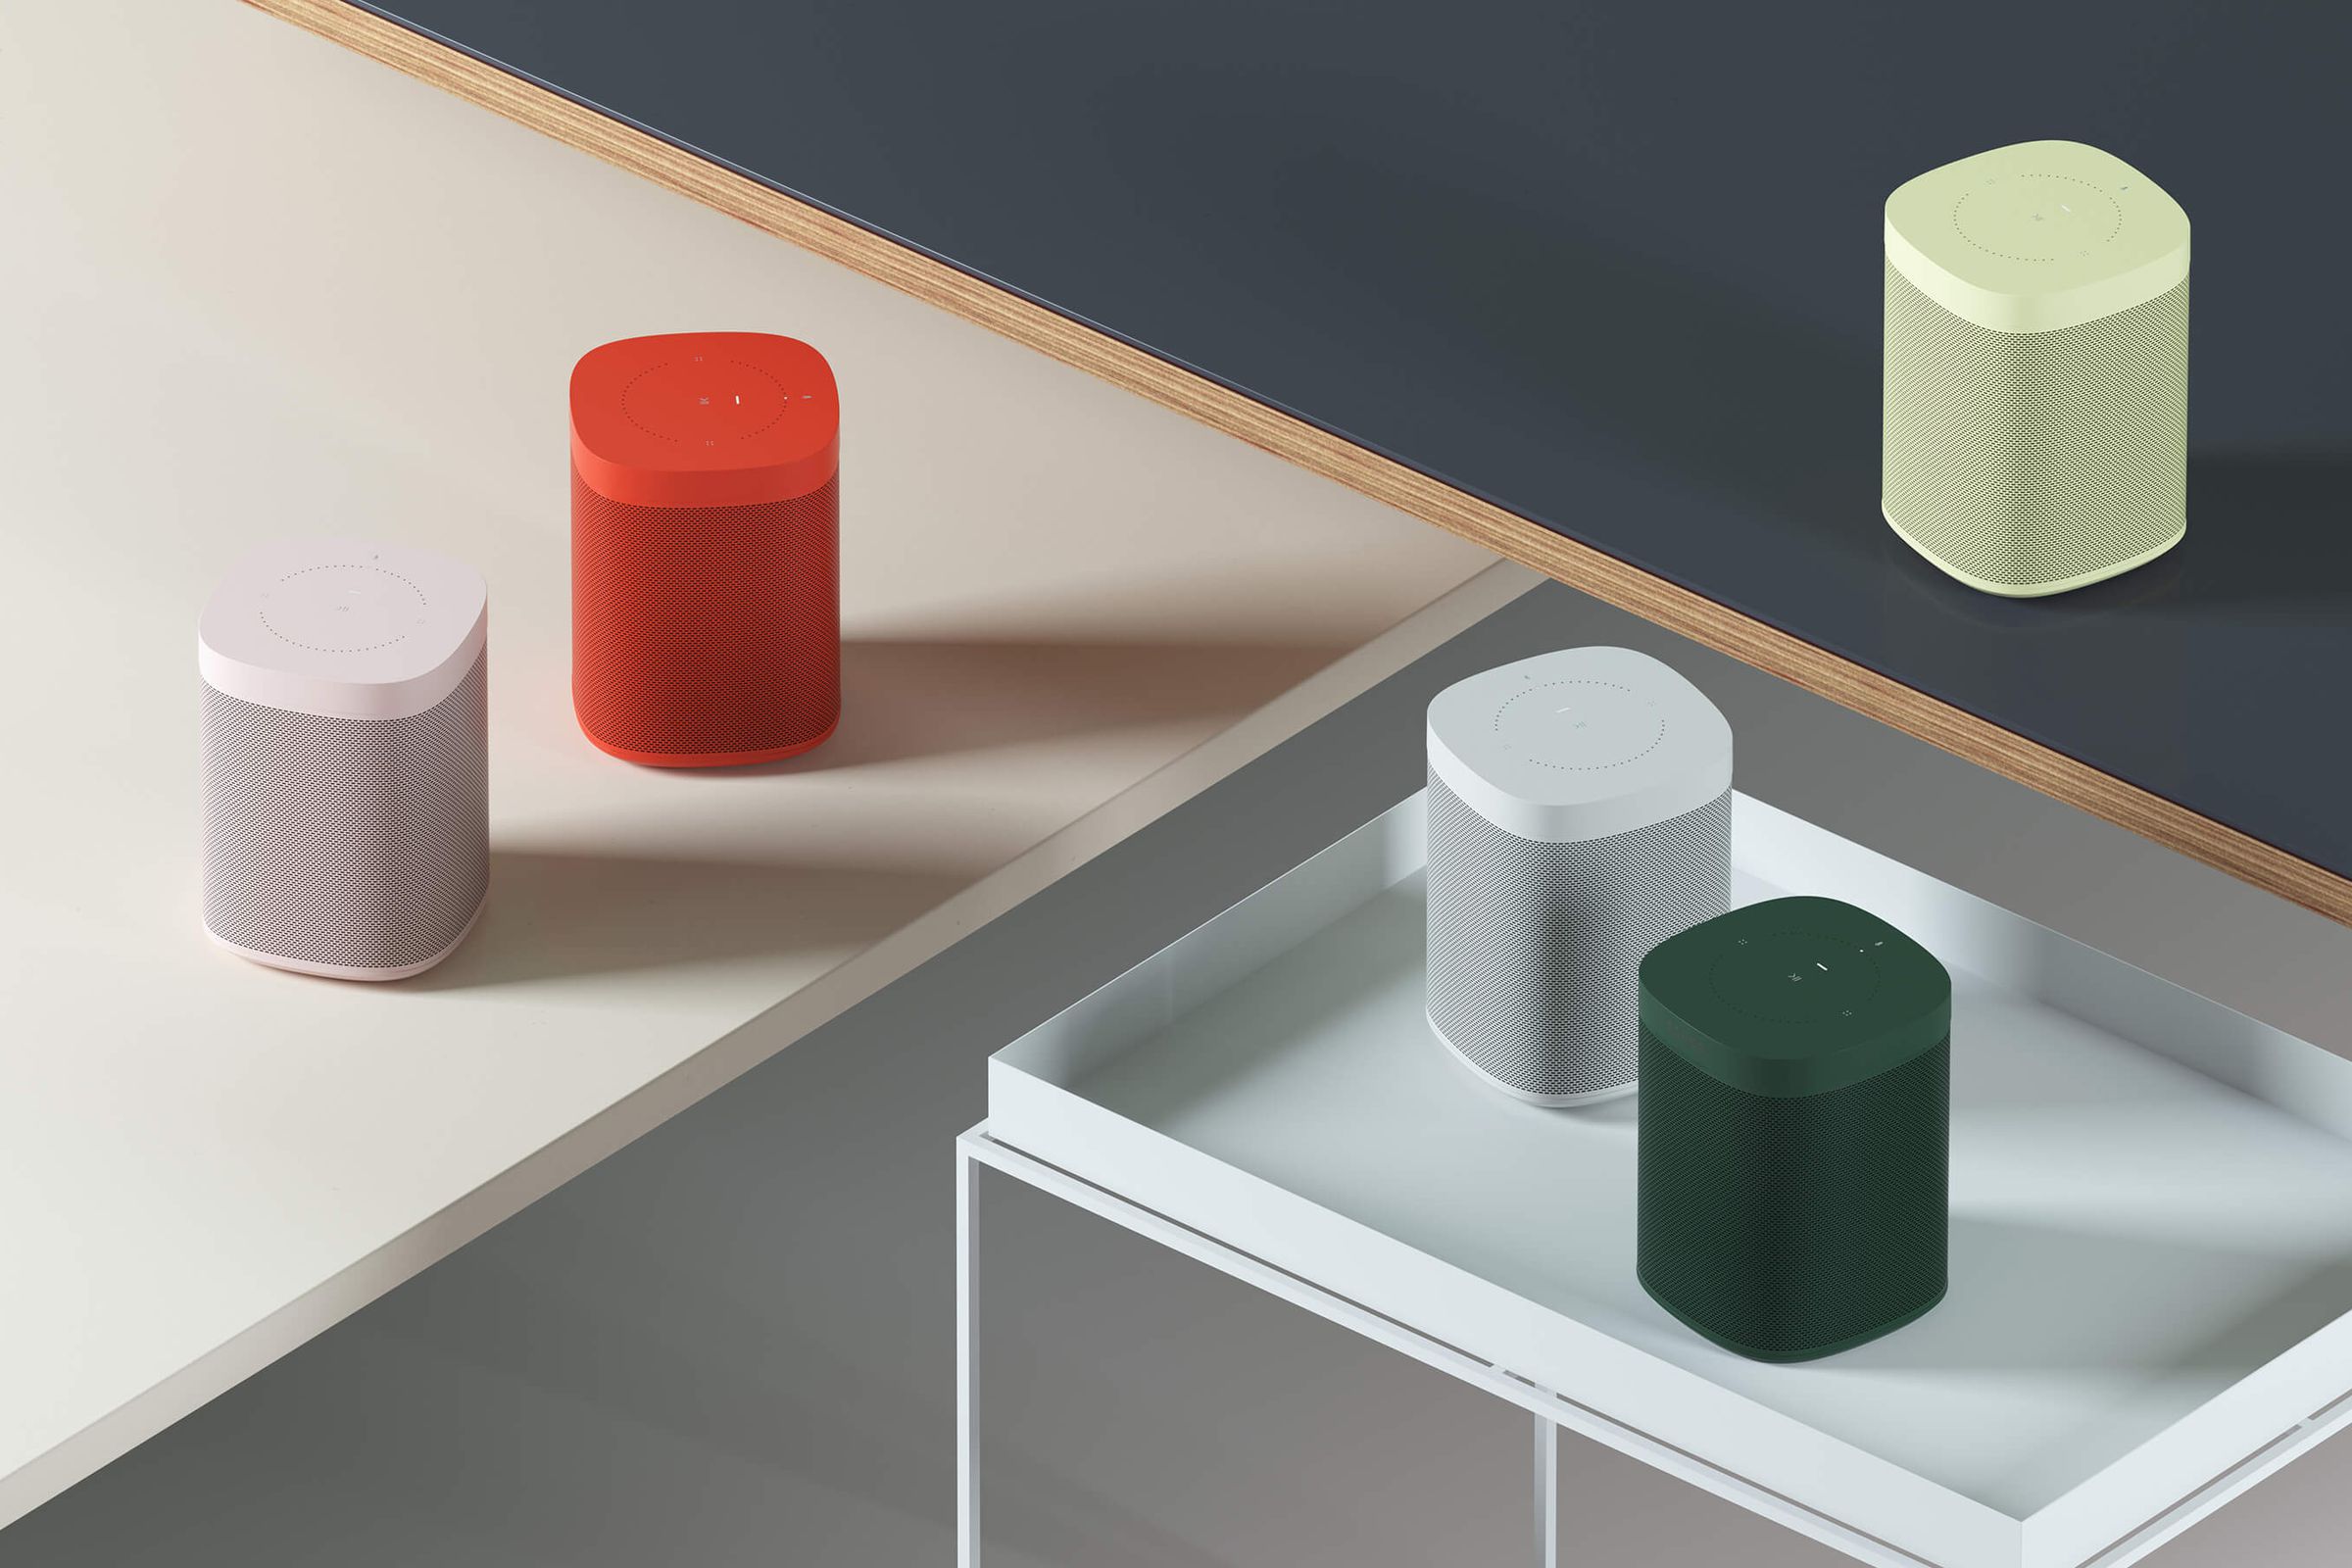 Sonos One, soon in five colors